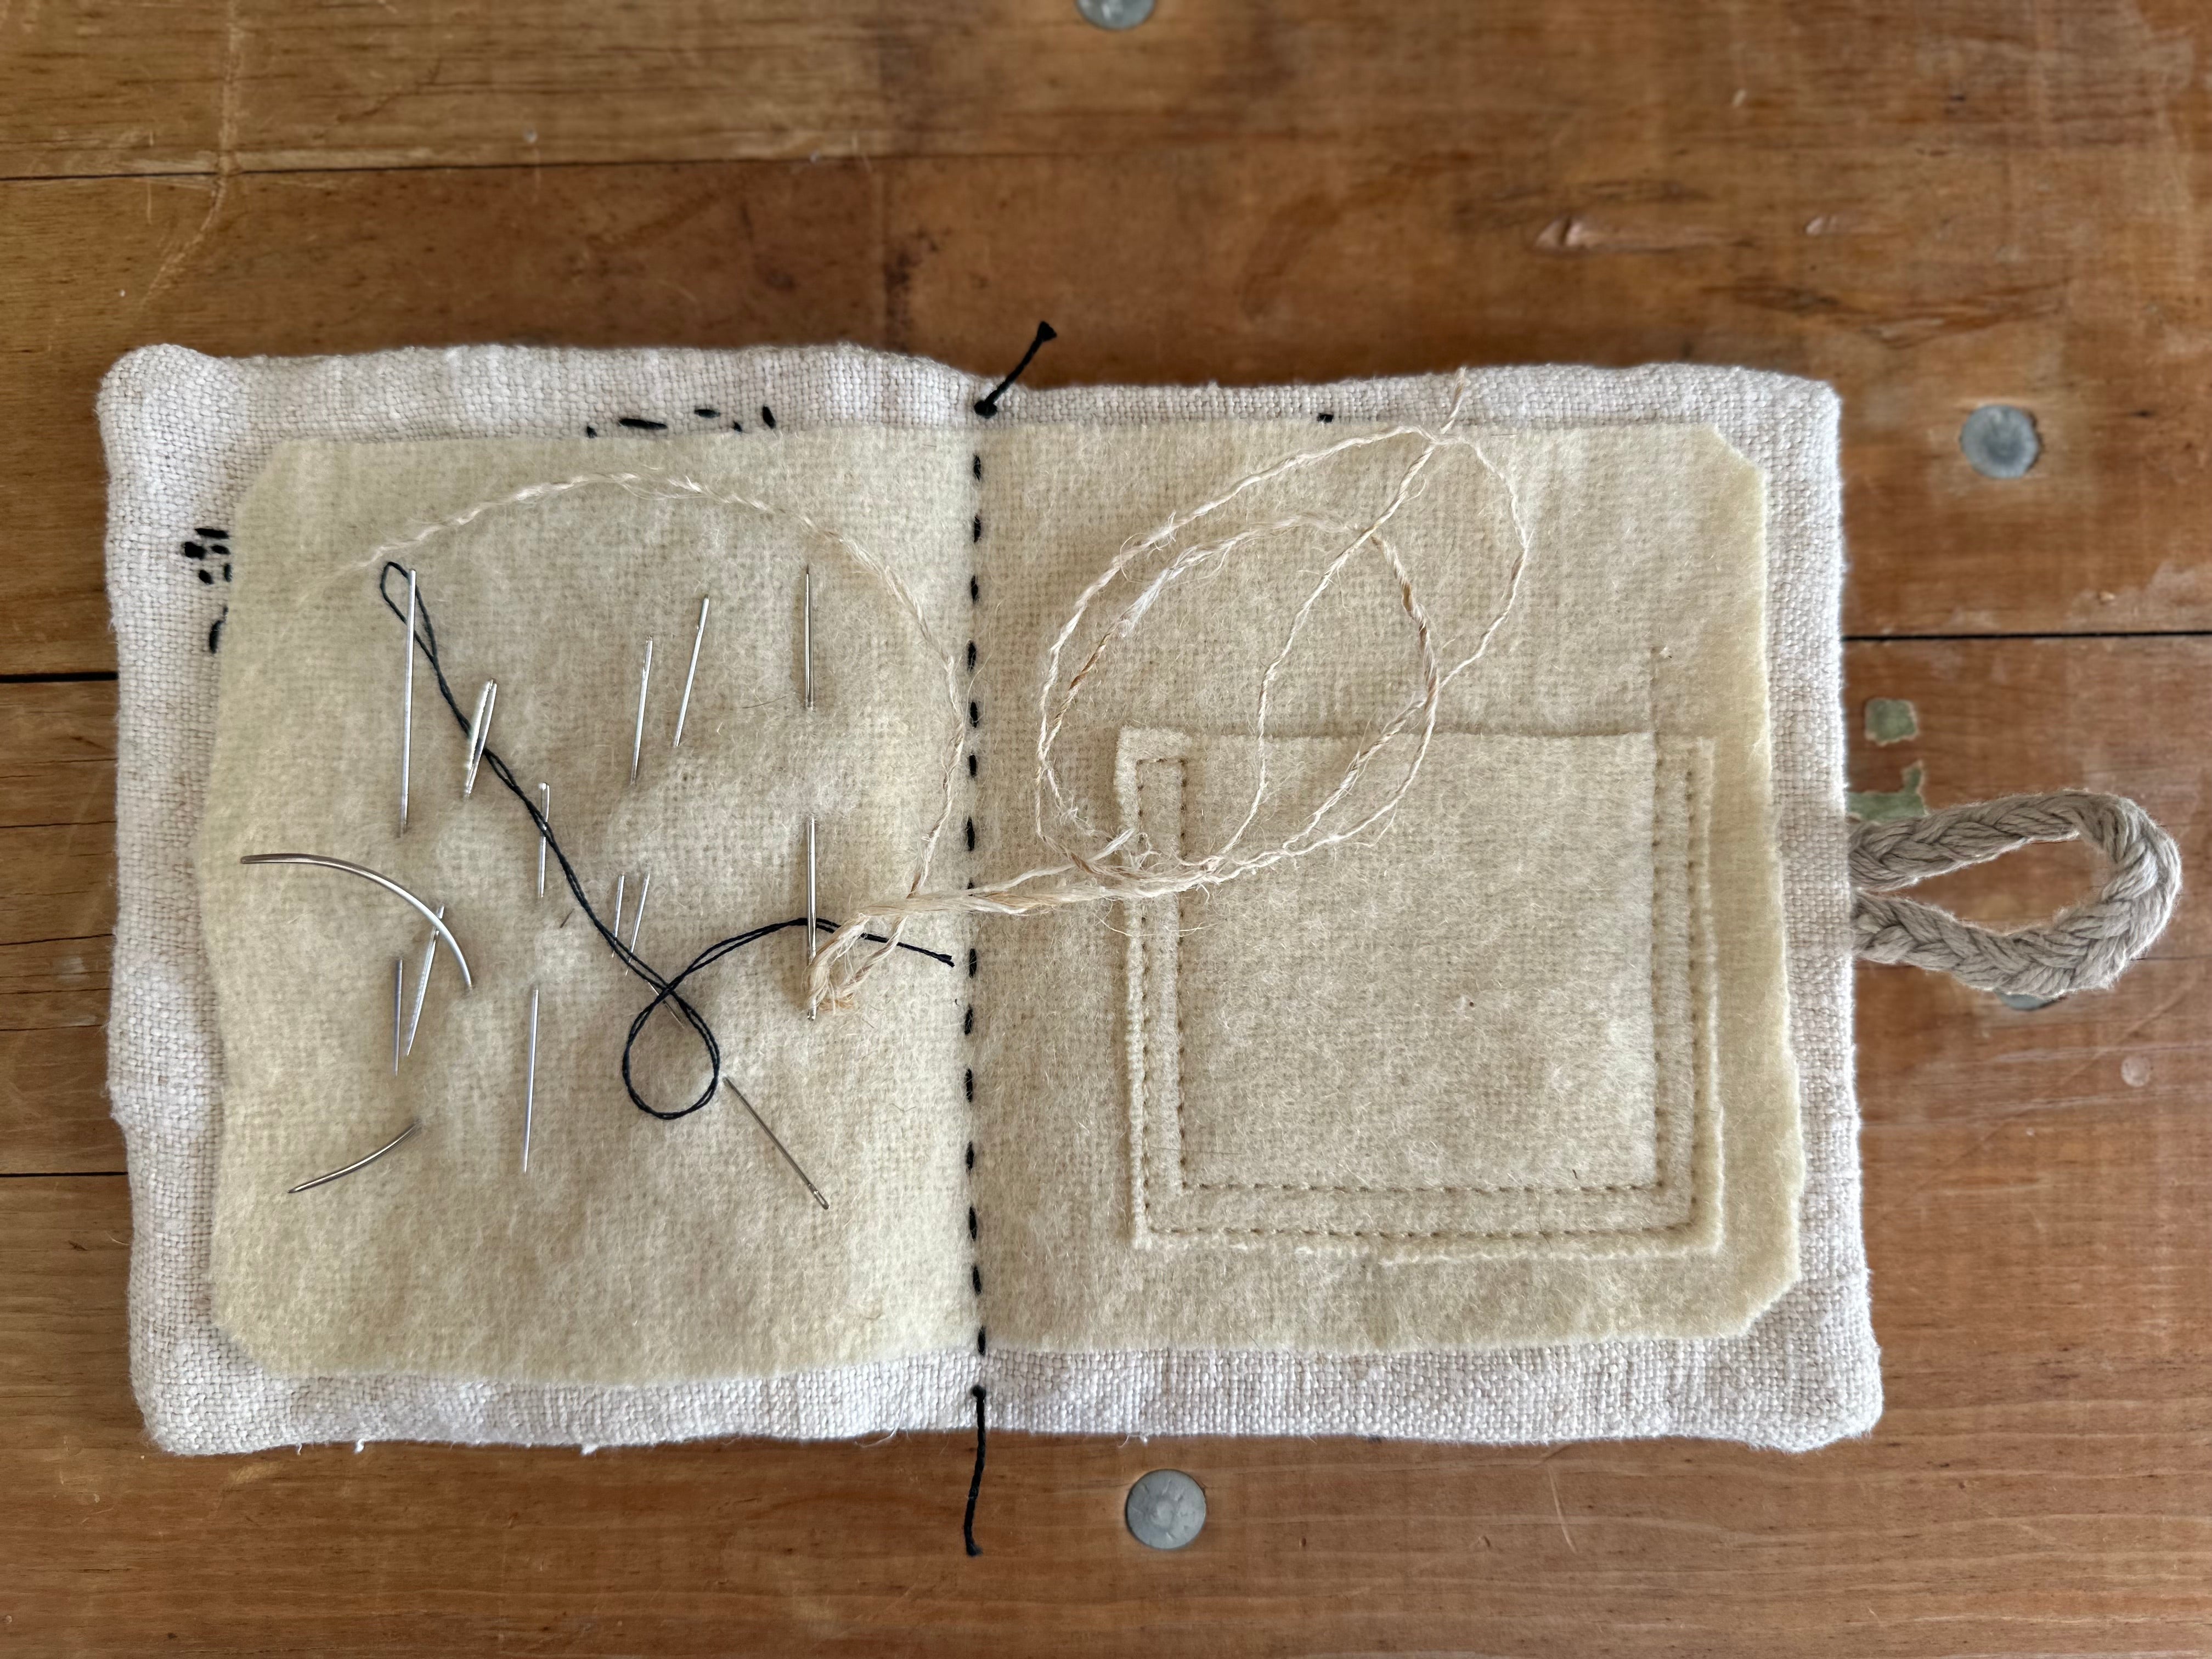 Grain-sack handsewing pouch